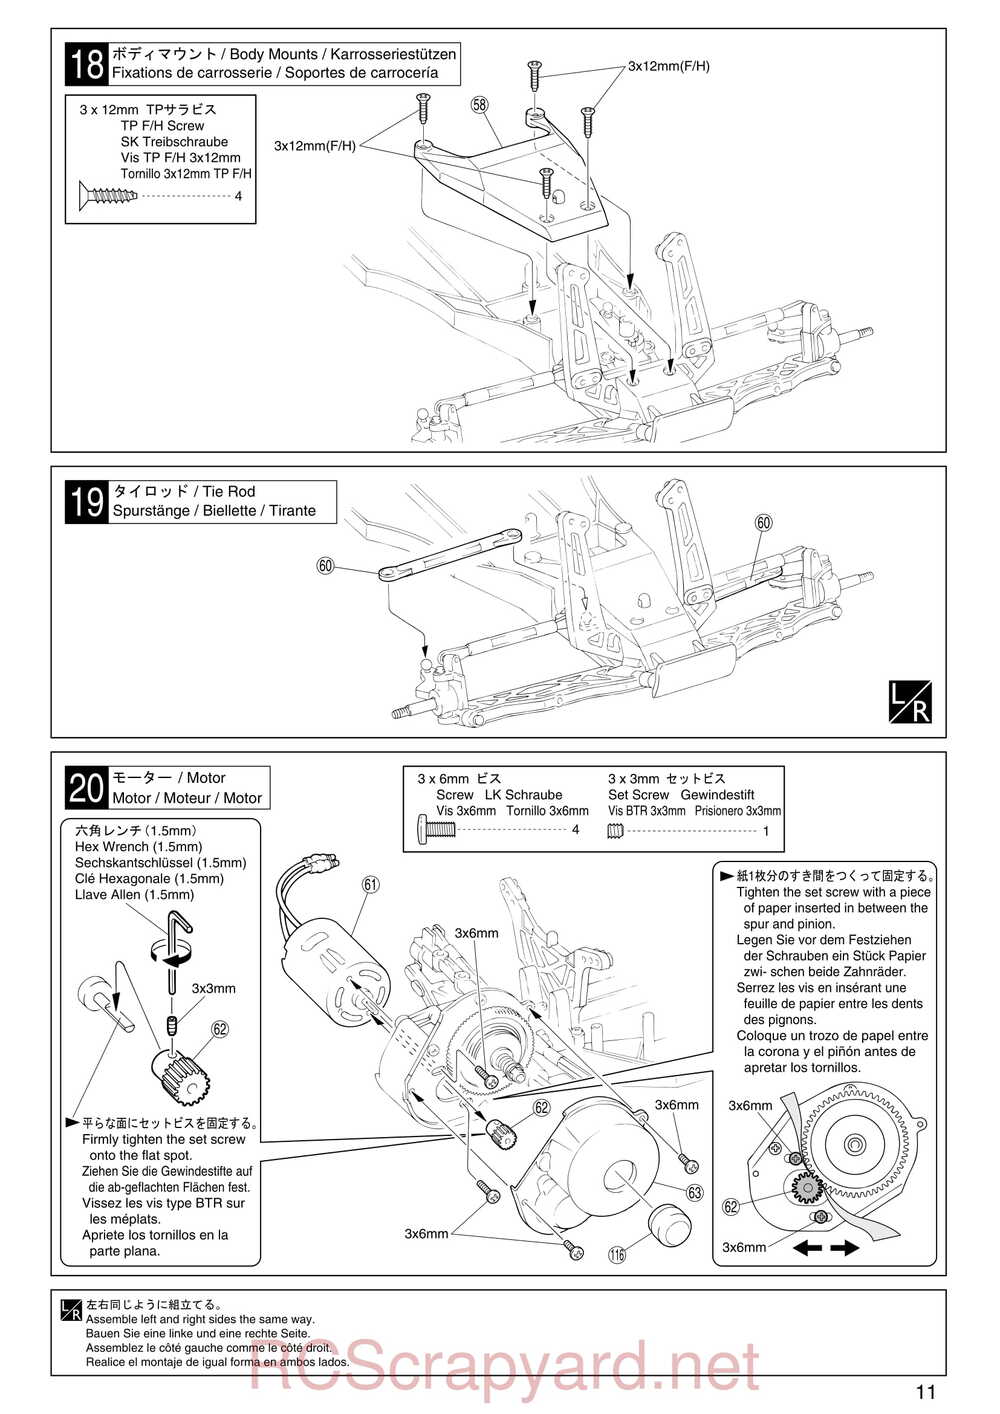 Kyosho - 30072 - EP-Ultima-RB-Racing-Sports - Manual - Page 11